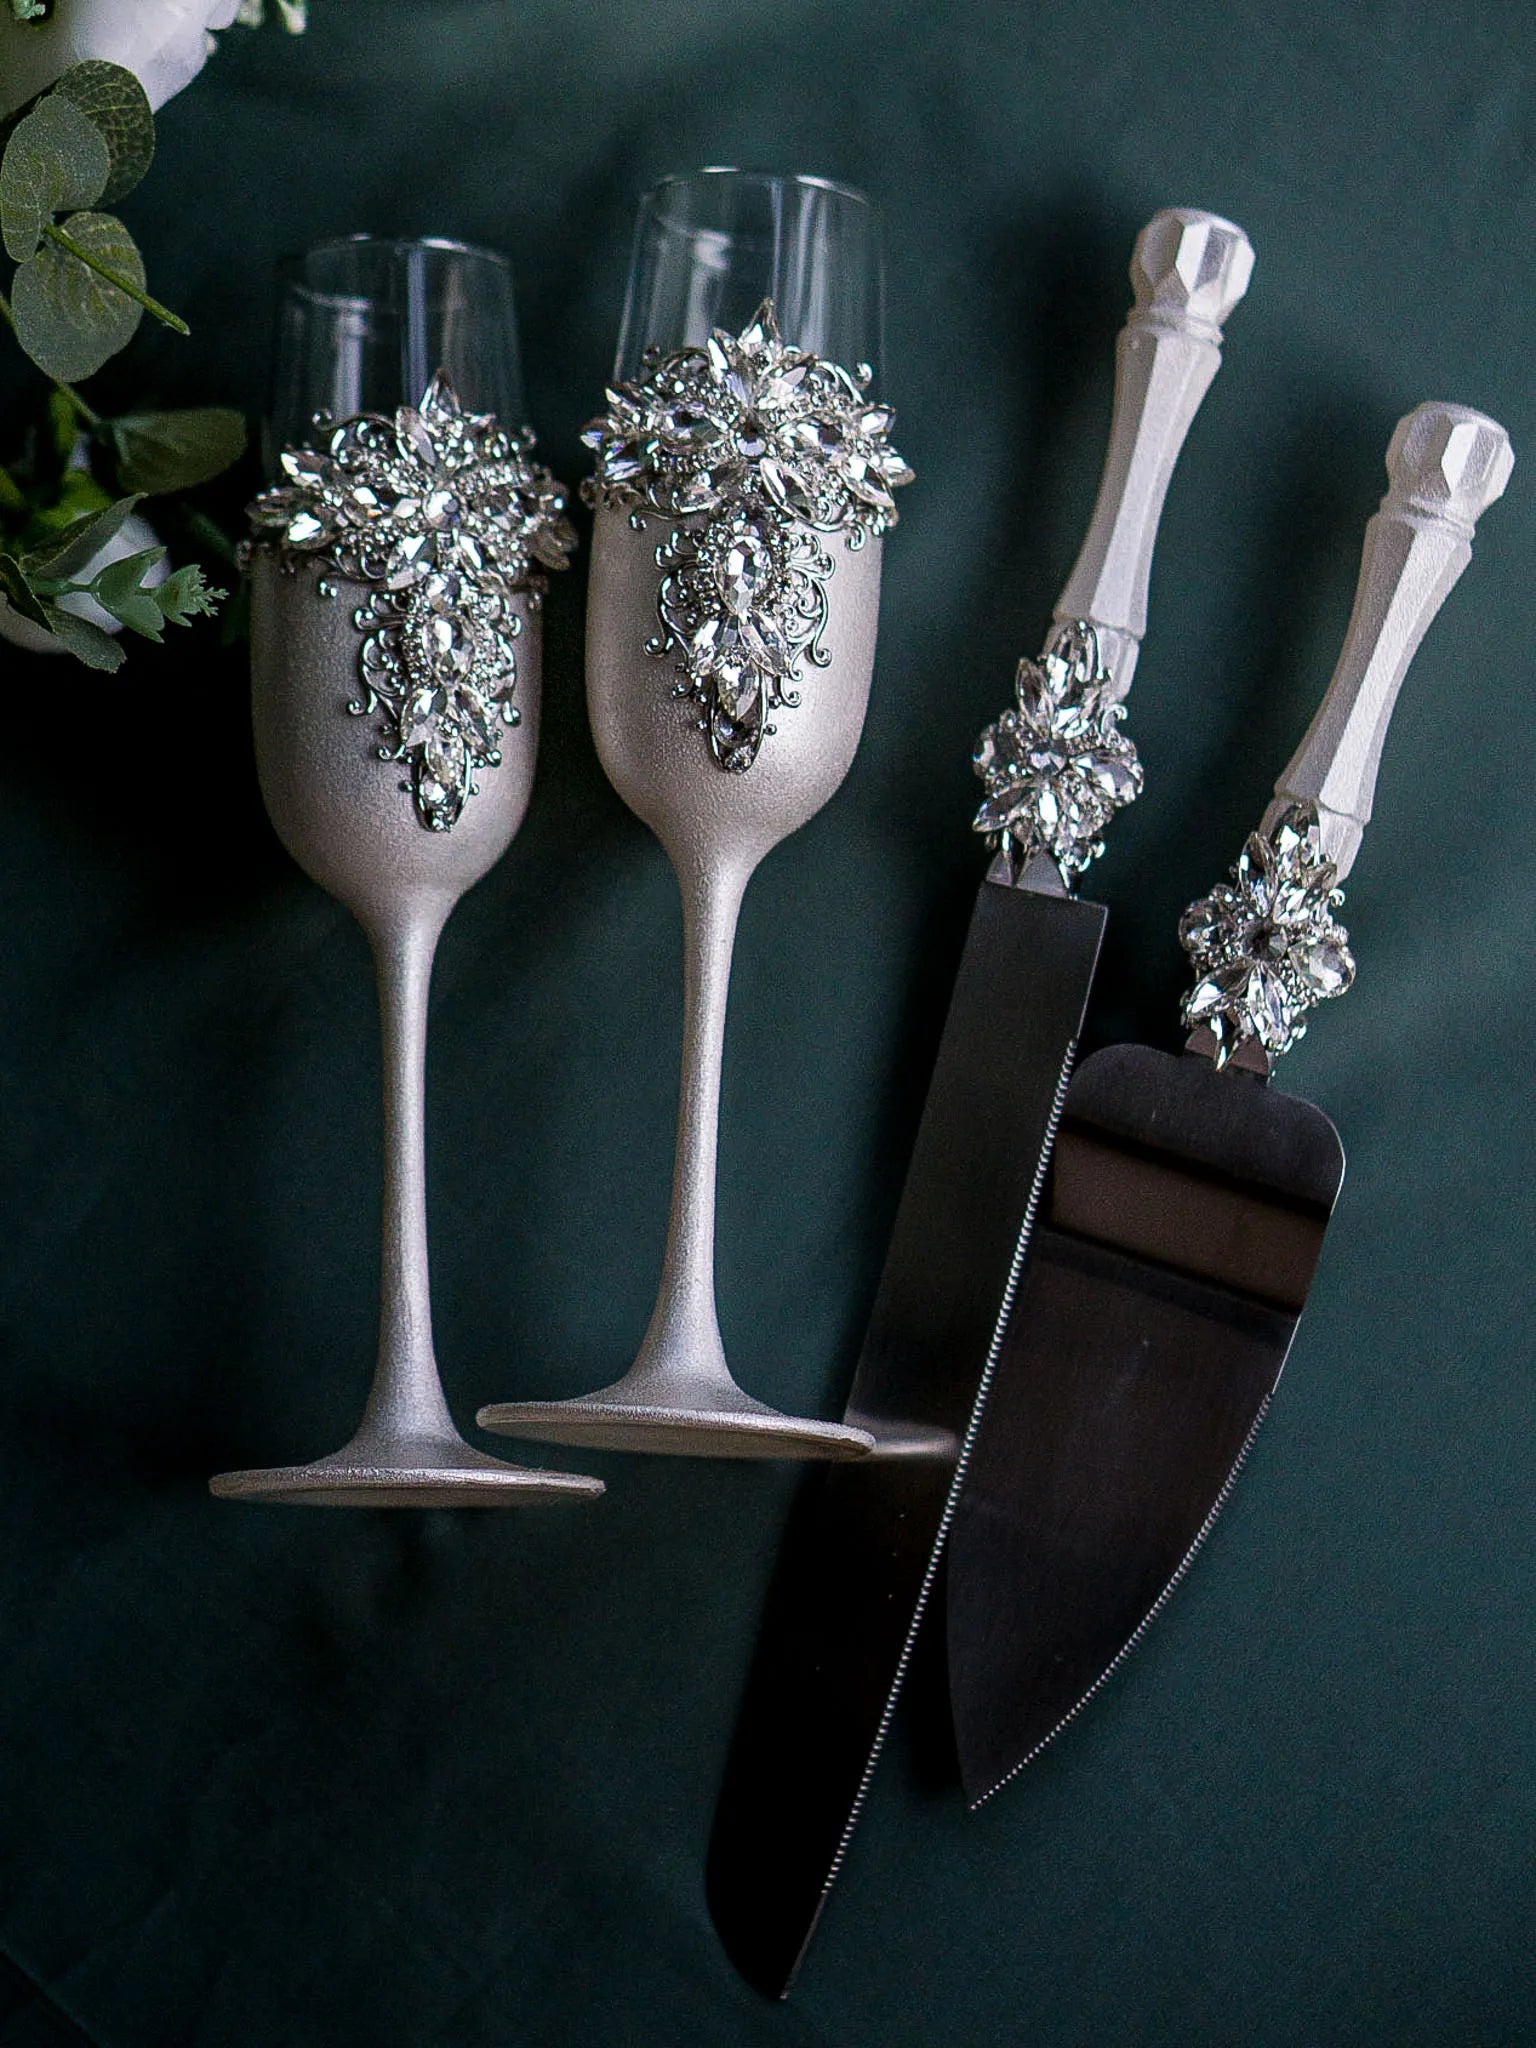 Silver Wedding Champagne Glasses with Server and Knife on display